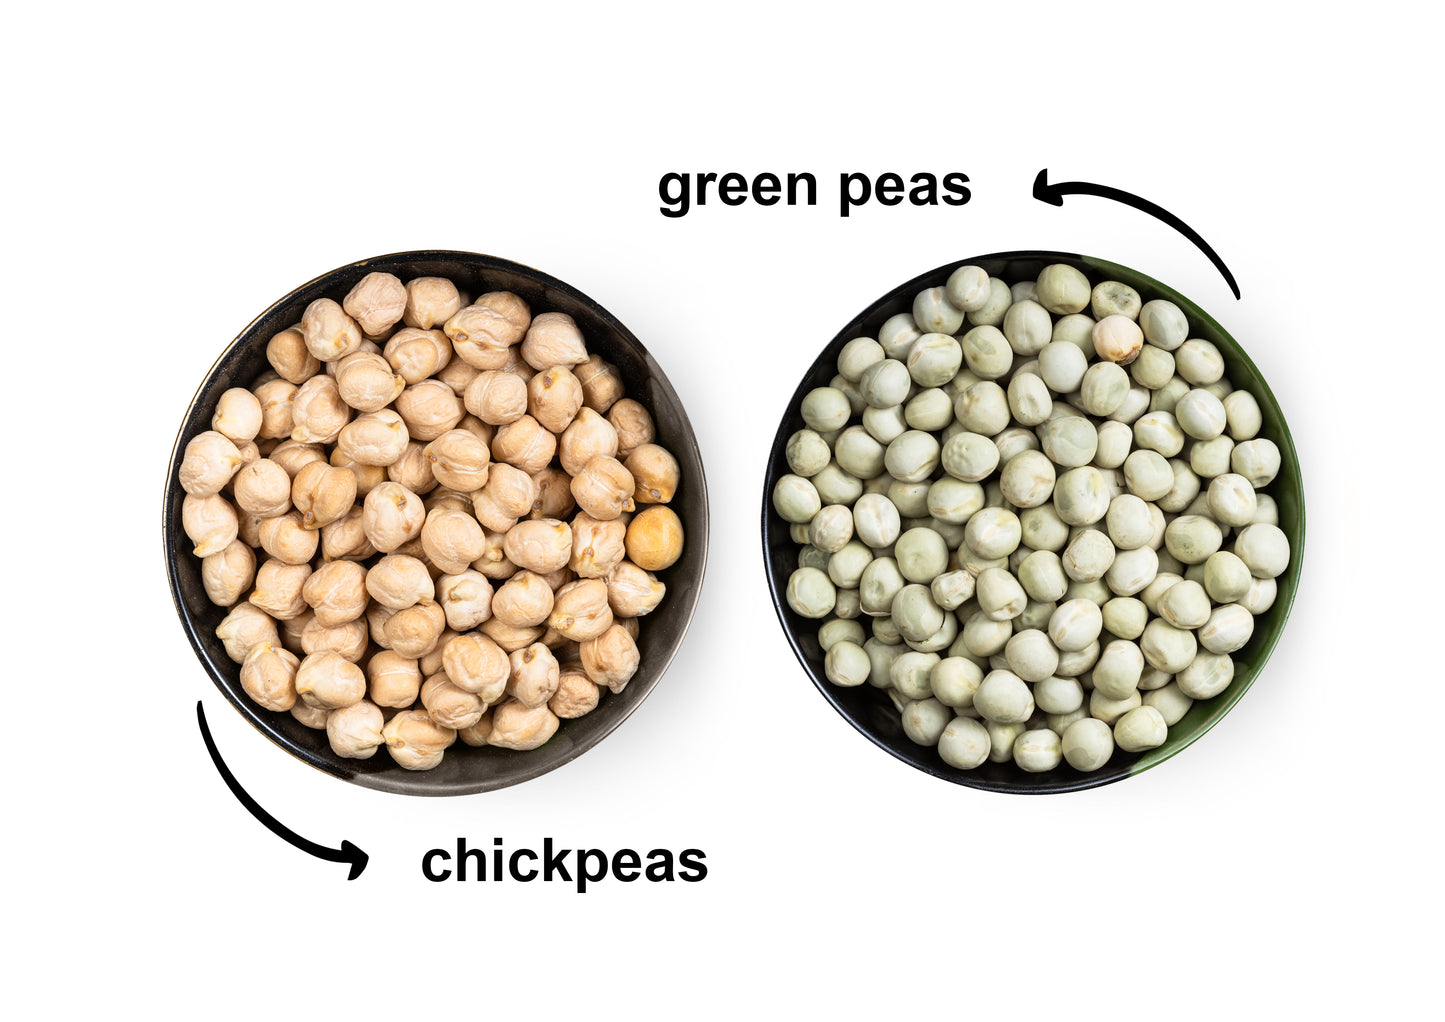 Premium Pulses Bundle, 2 Pack – Chickpeas (5 LB), Whole Green Peas (5 LB), Dried Garbanzo Beans and Green Peas, Raw, Vegan, Kosher, Sproutable, Rich in Fiber and Protein, Legumes in Bulk